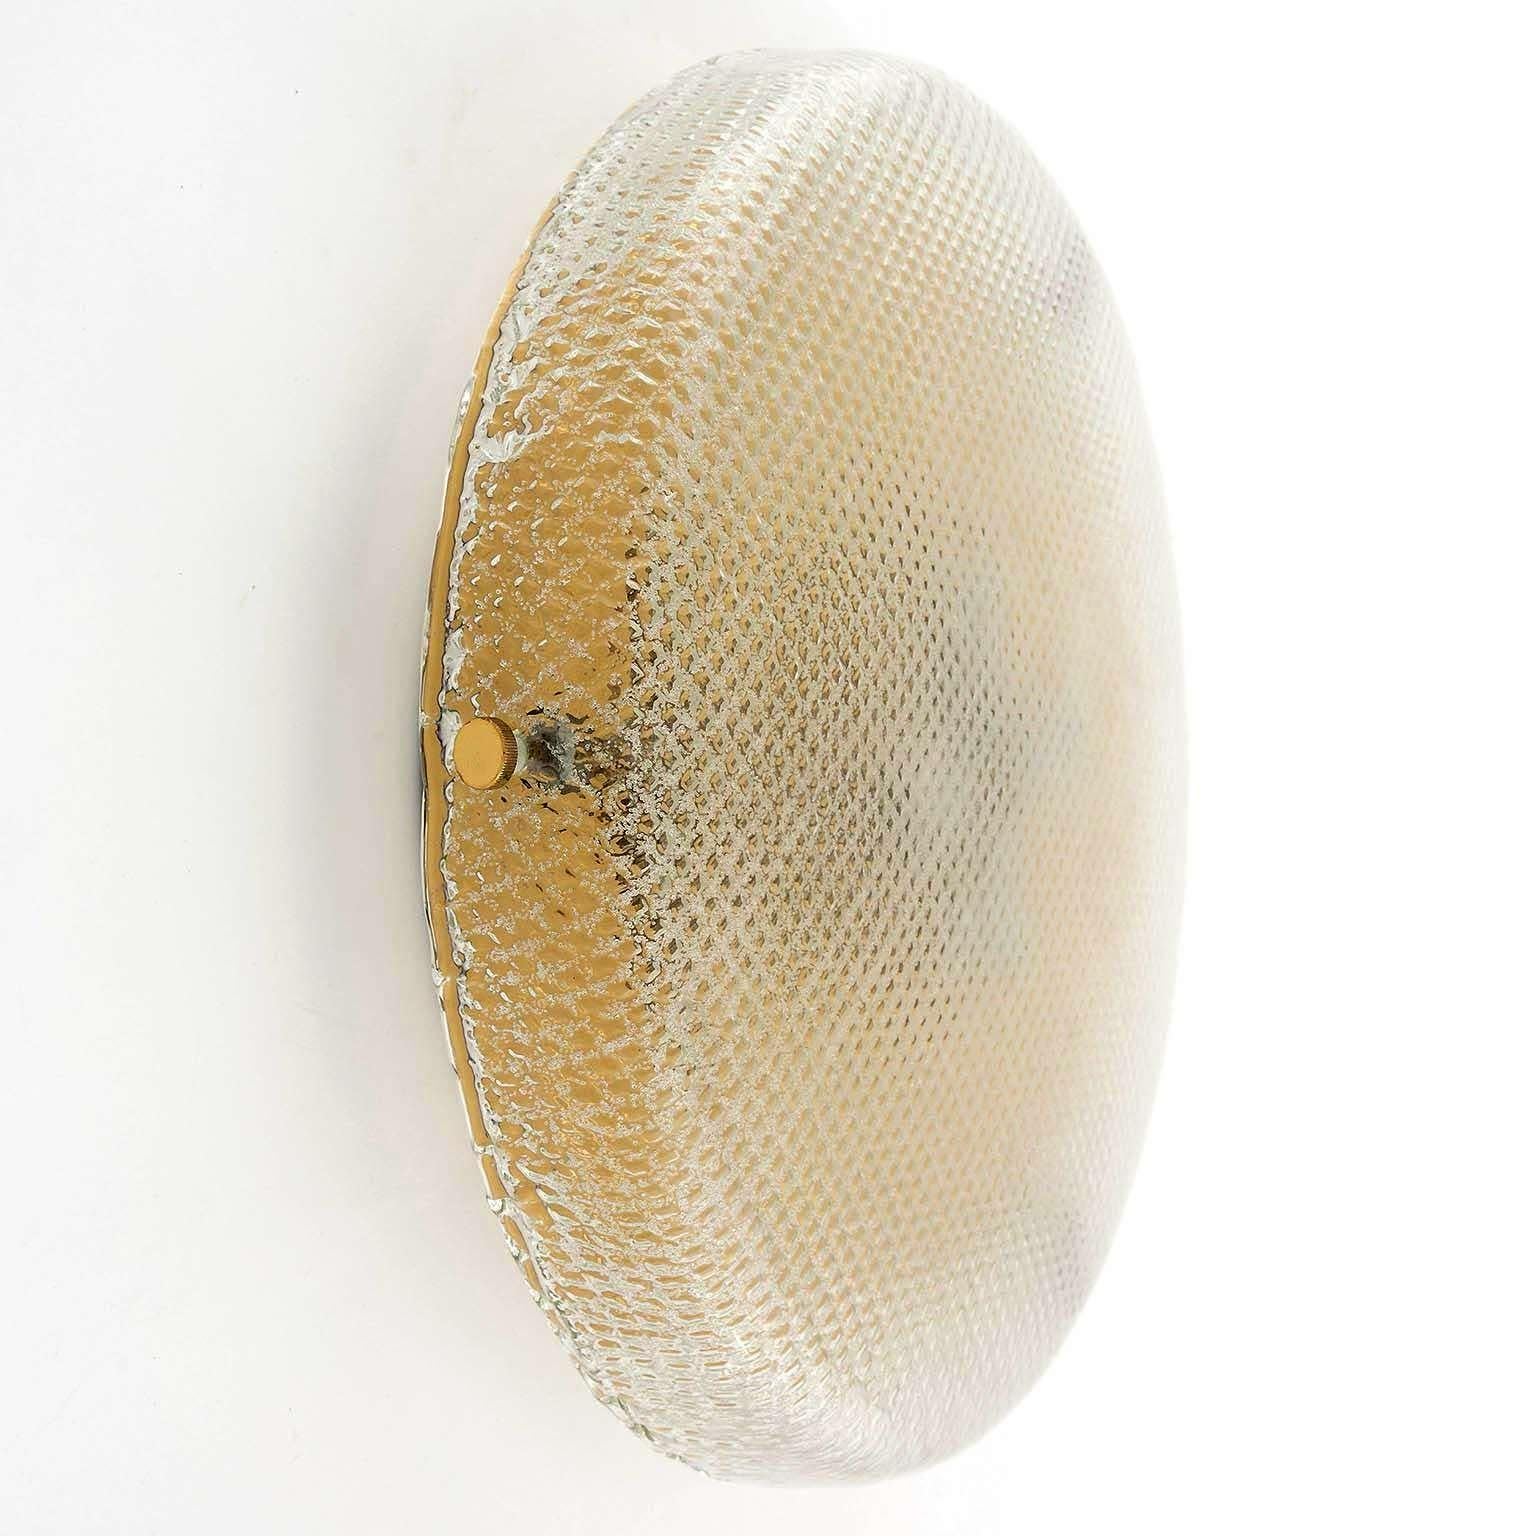 Mid-20th Century Hillebrand Flush Mount or Wall Light Fixture, Brass Square Pattern Glass, 1970